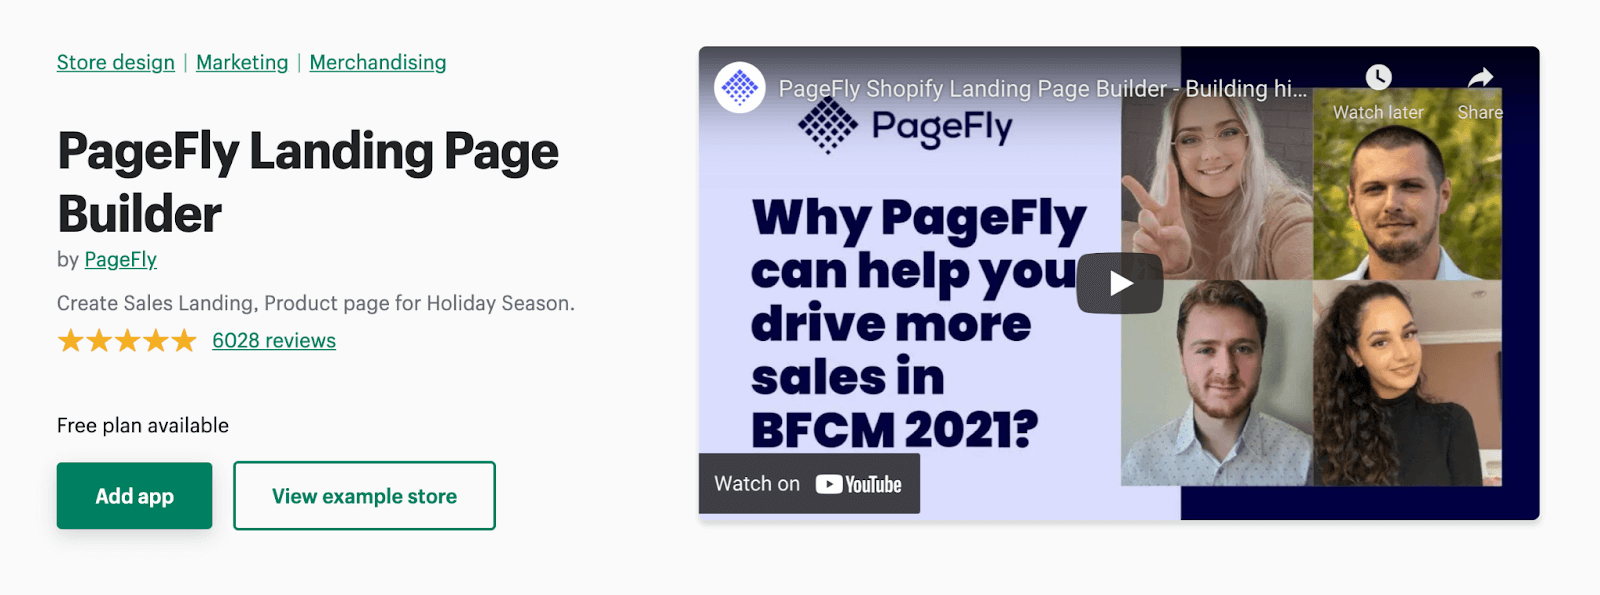 Shopify App Store- PageFly Landing Page Builder- Conversion Rate